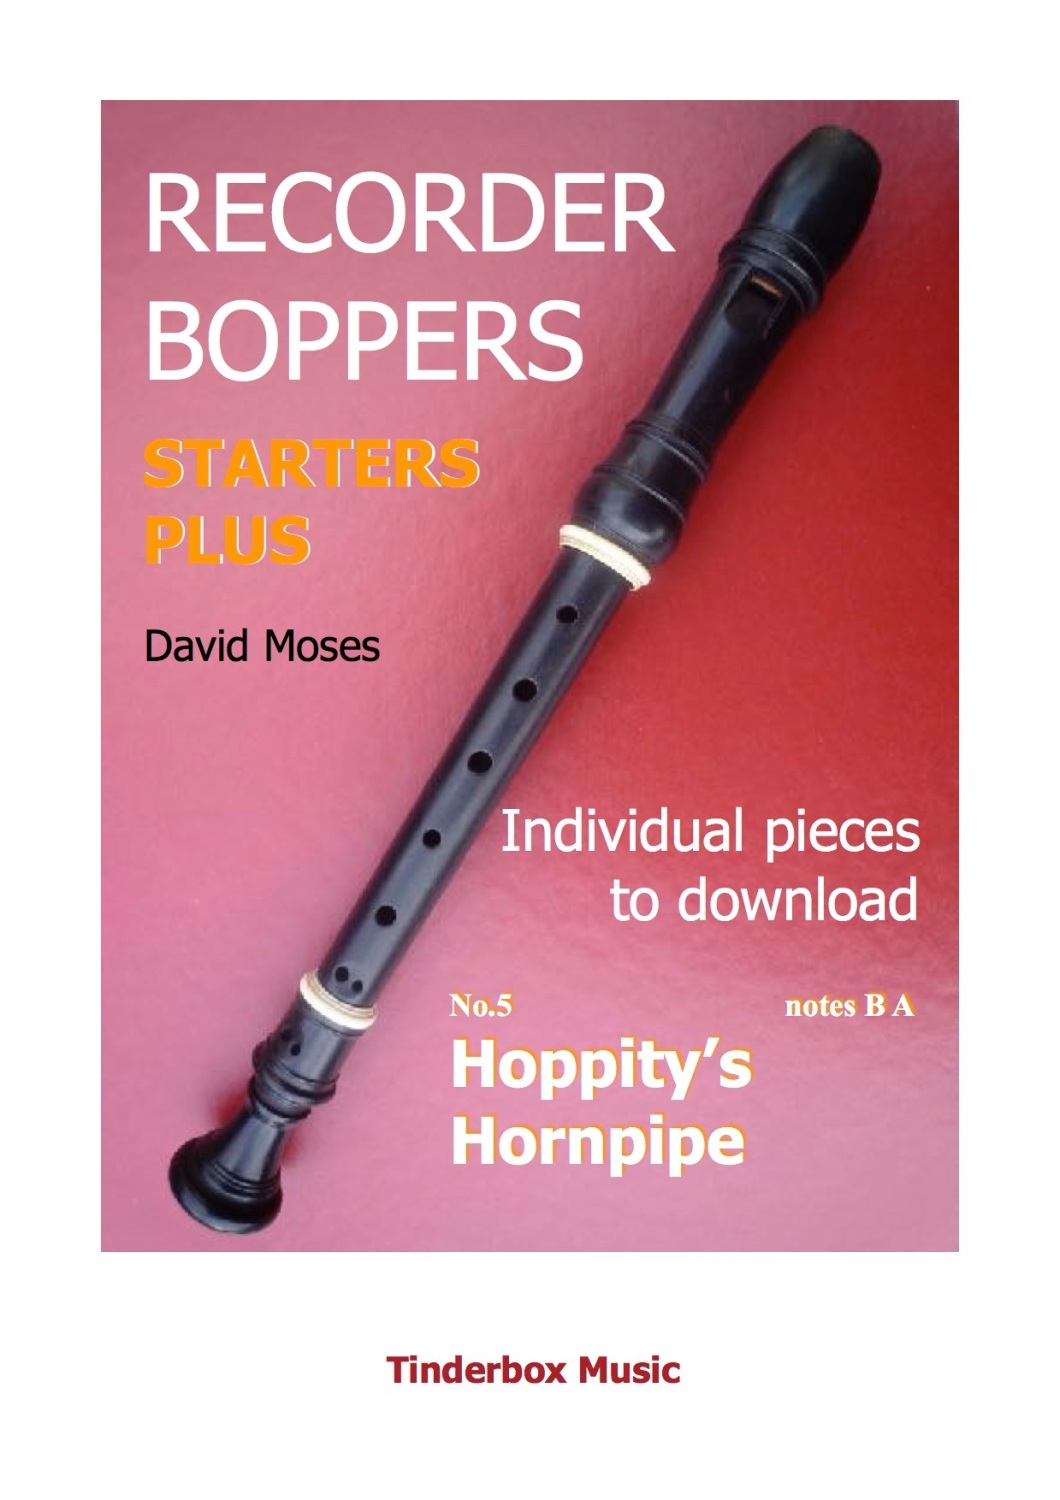 STARTERS PLUS individual pieces no.5  HOPPITY'S HORNPIPE  download